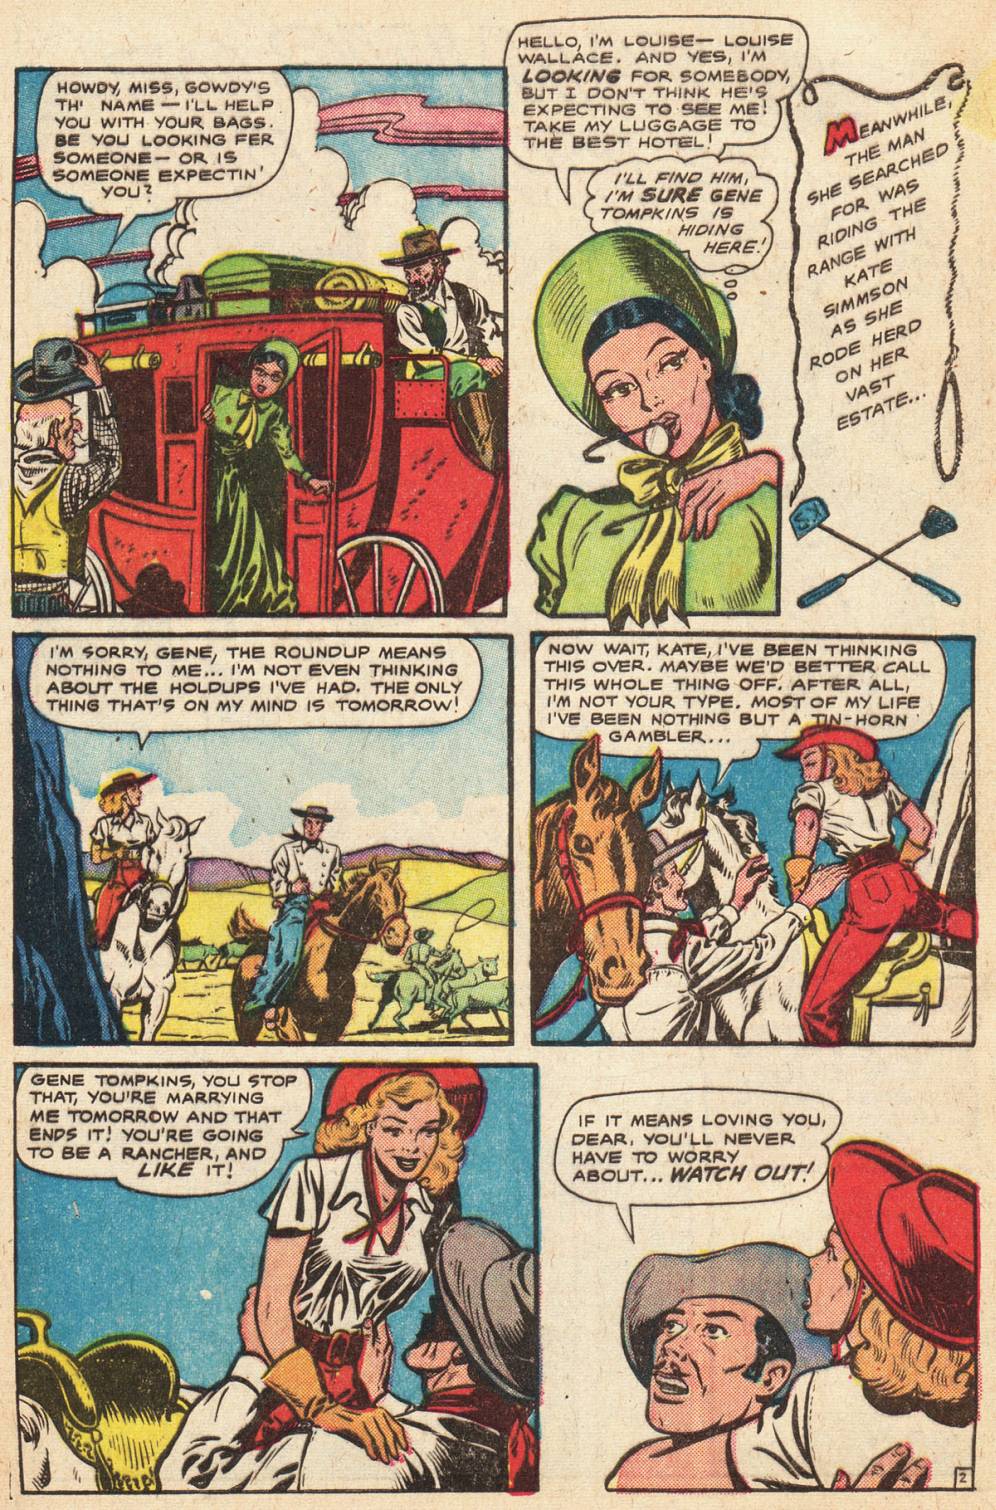 Cowgirl Romances (1950) issue 5 - Page 4